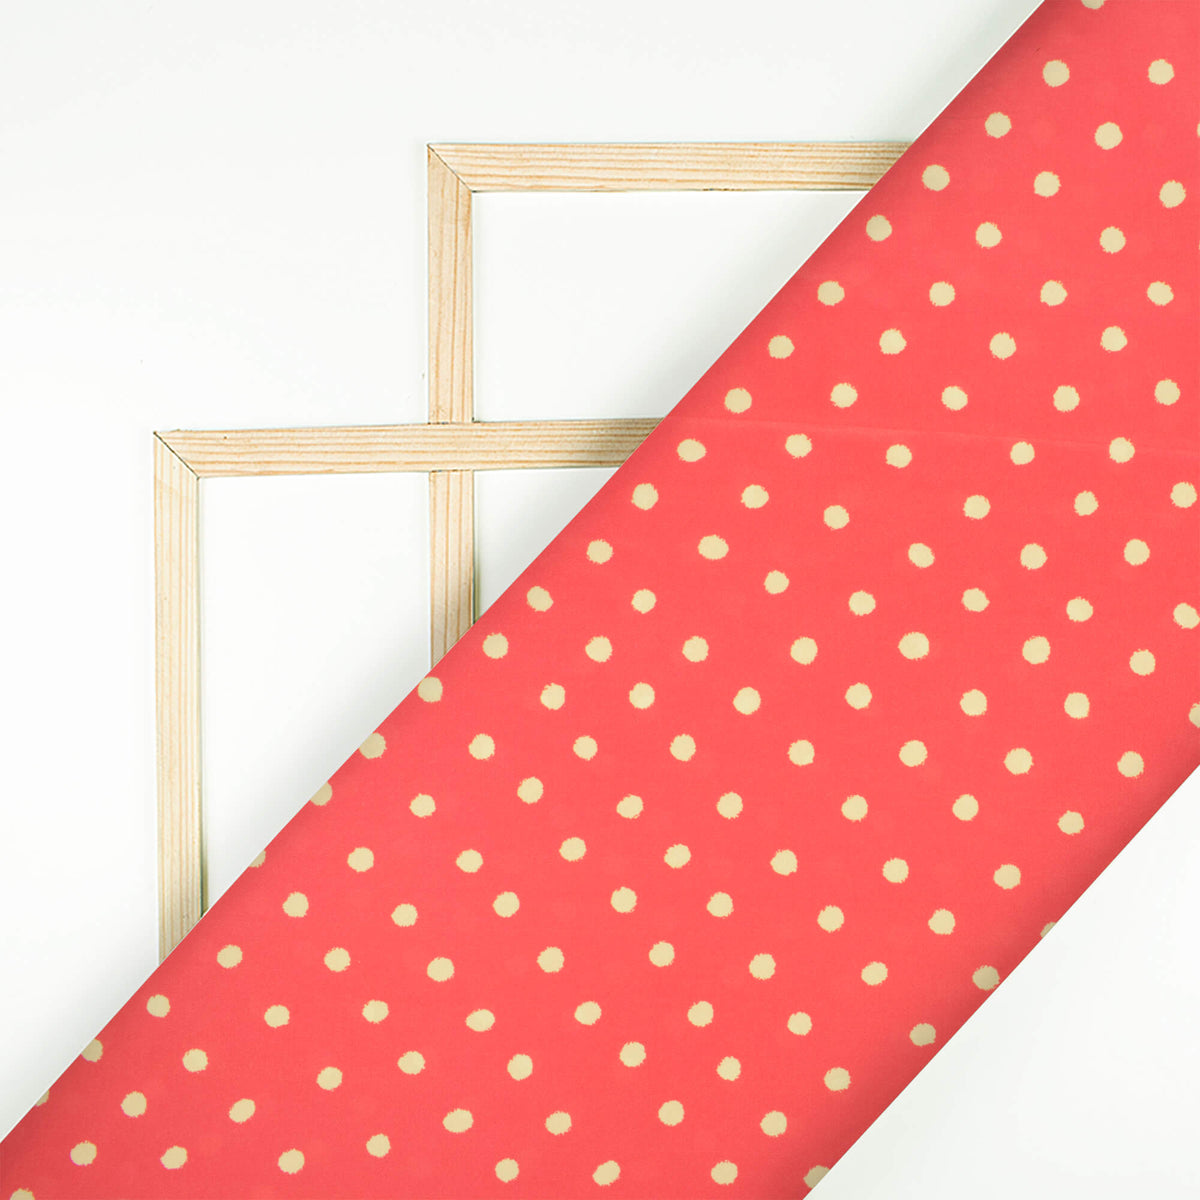 Orange And Cream Polka Dots Pattern Digital Print French Crepe Fabric - Fabcurate